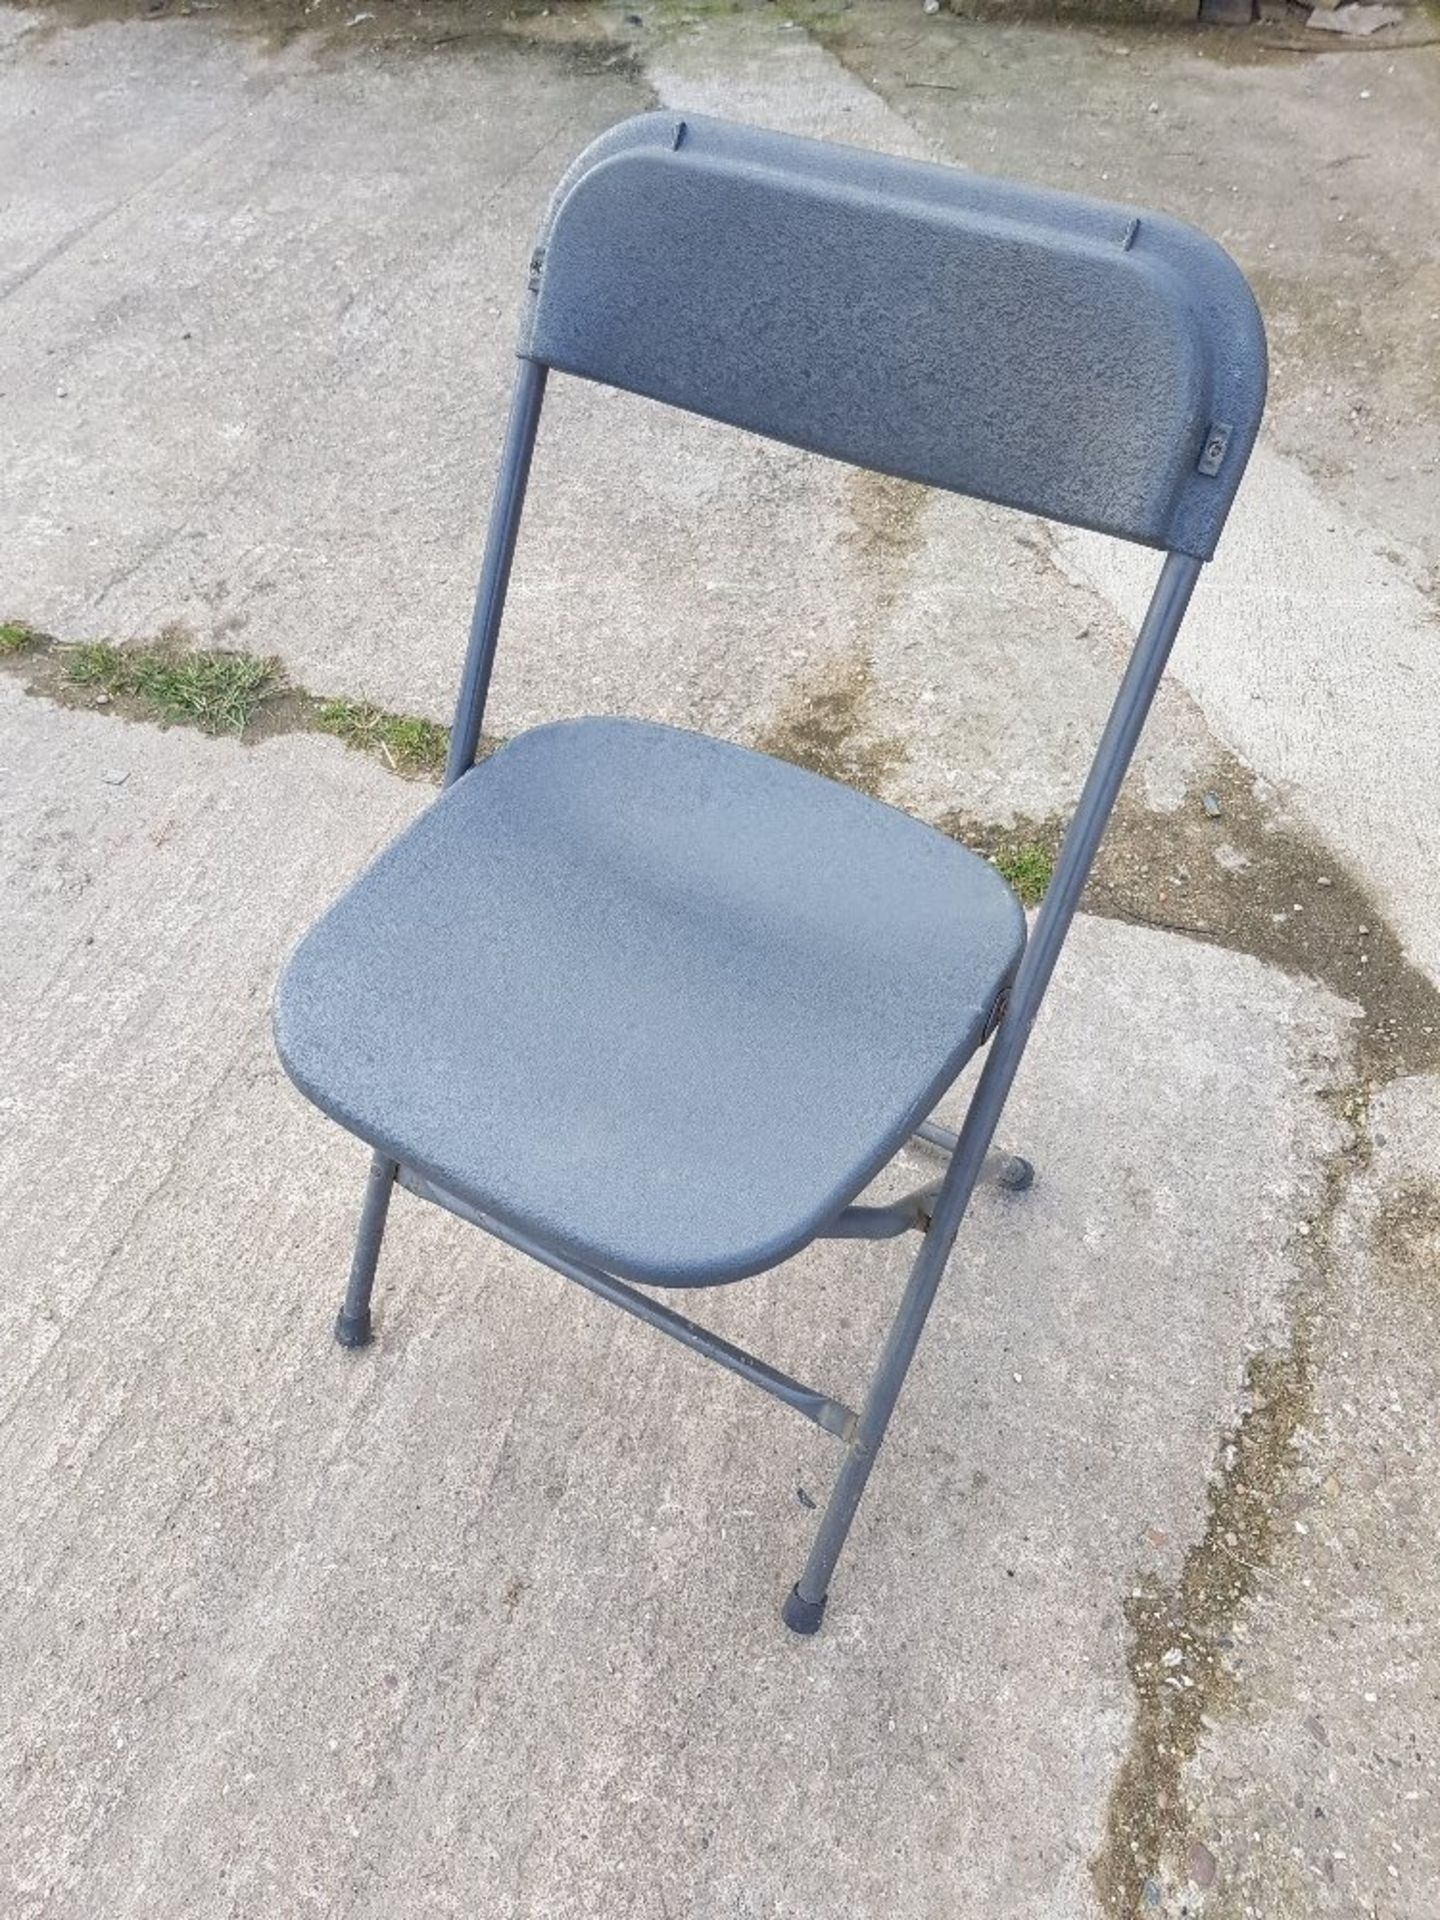 Lot of 40 x Used Fold Up Banqueting Chairs - Good Condition – NO VAT